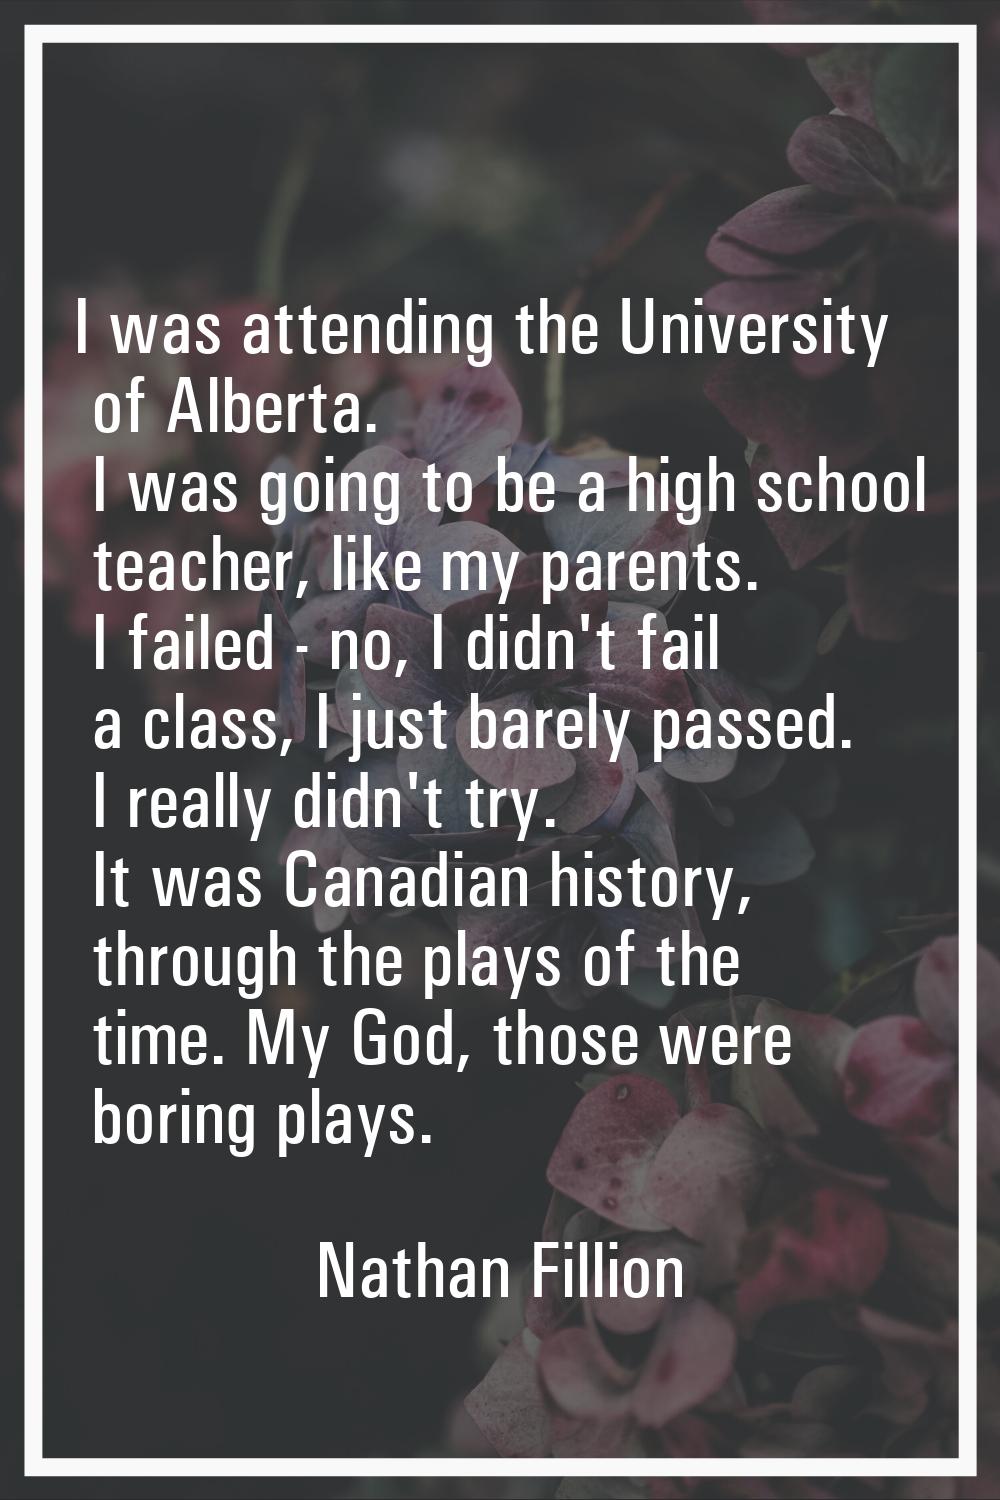 I was attending the University of Alberta. I was going to be a high school teacher, like my parents